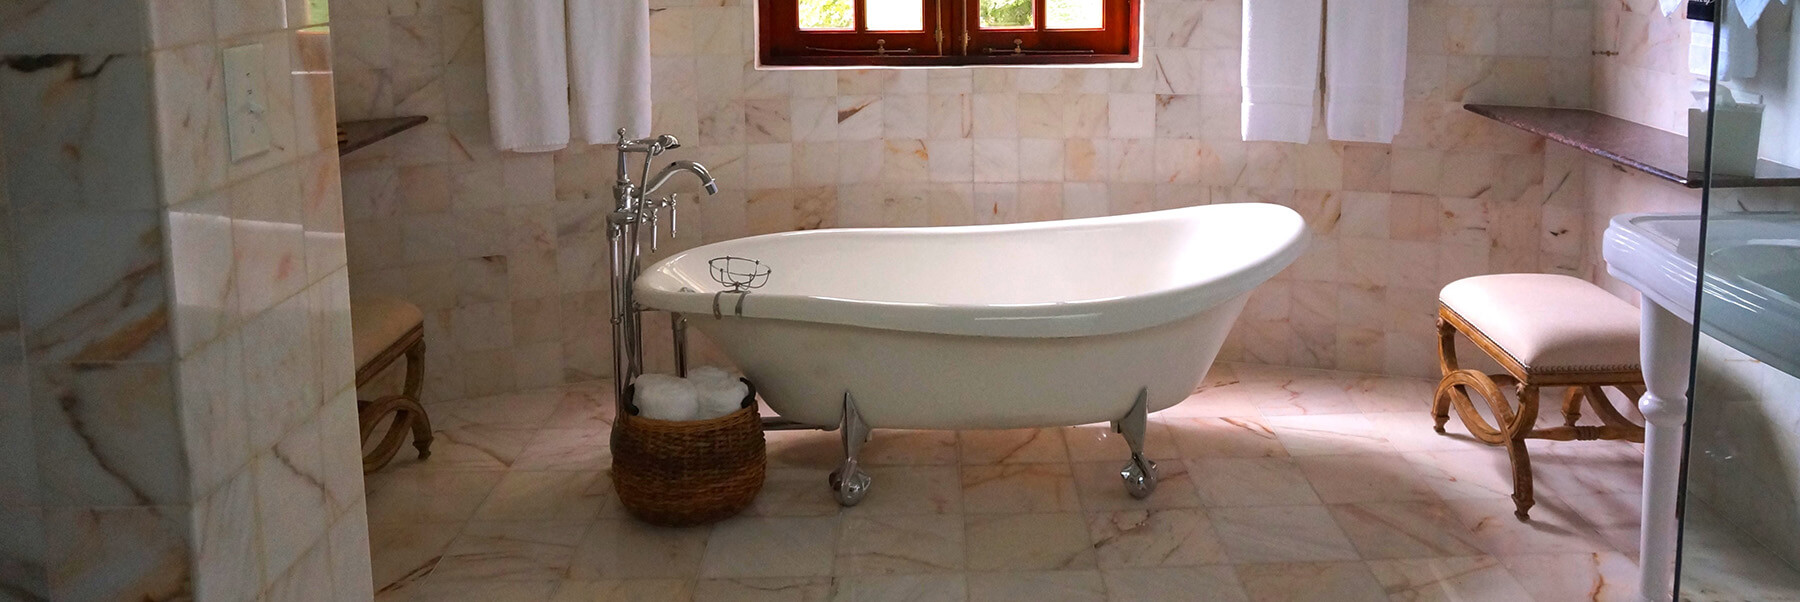 white tub in bathroom with tan tiles